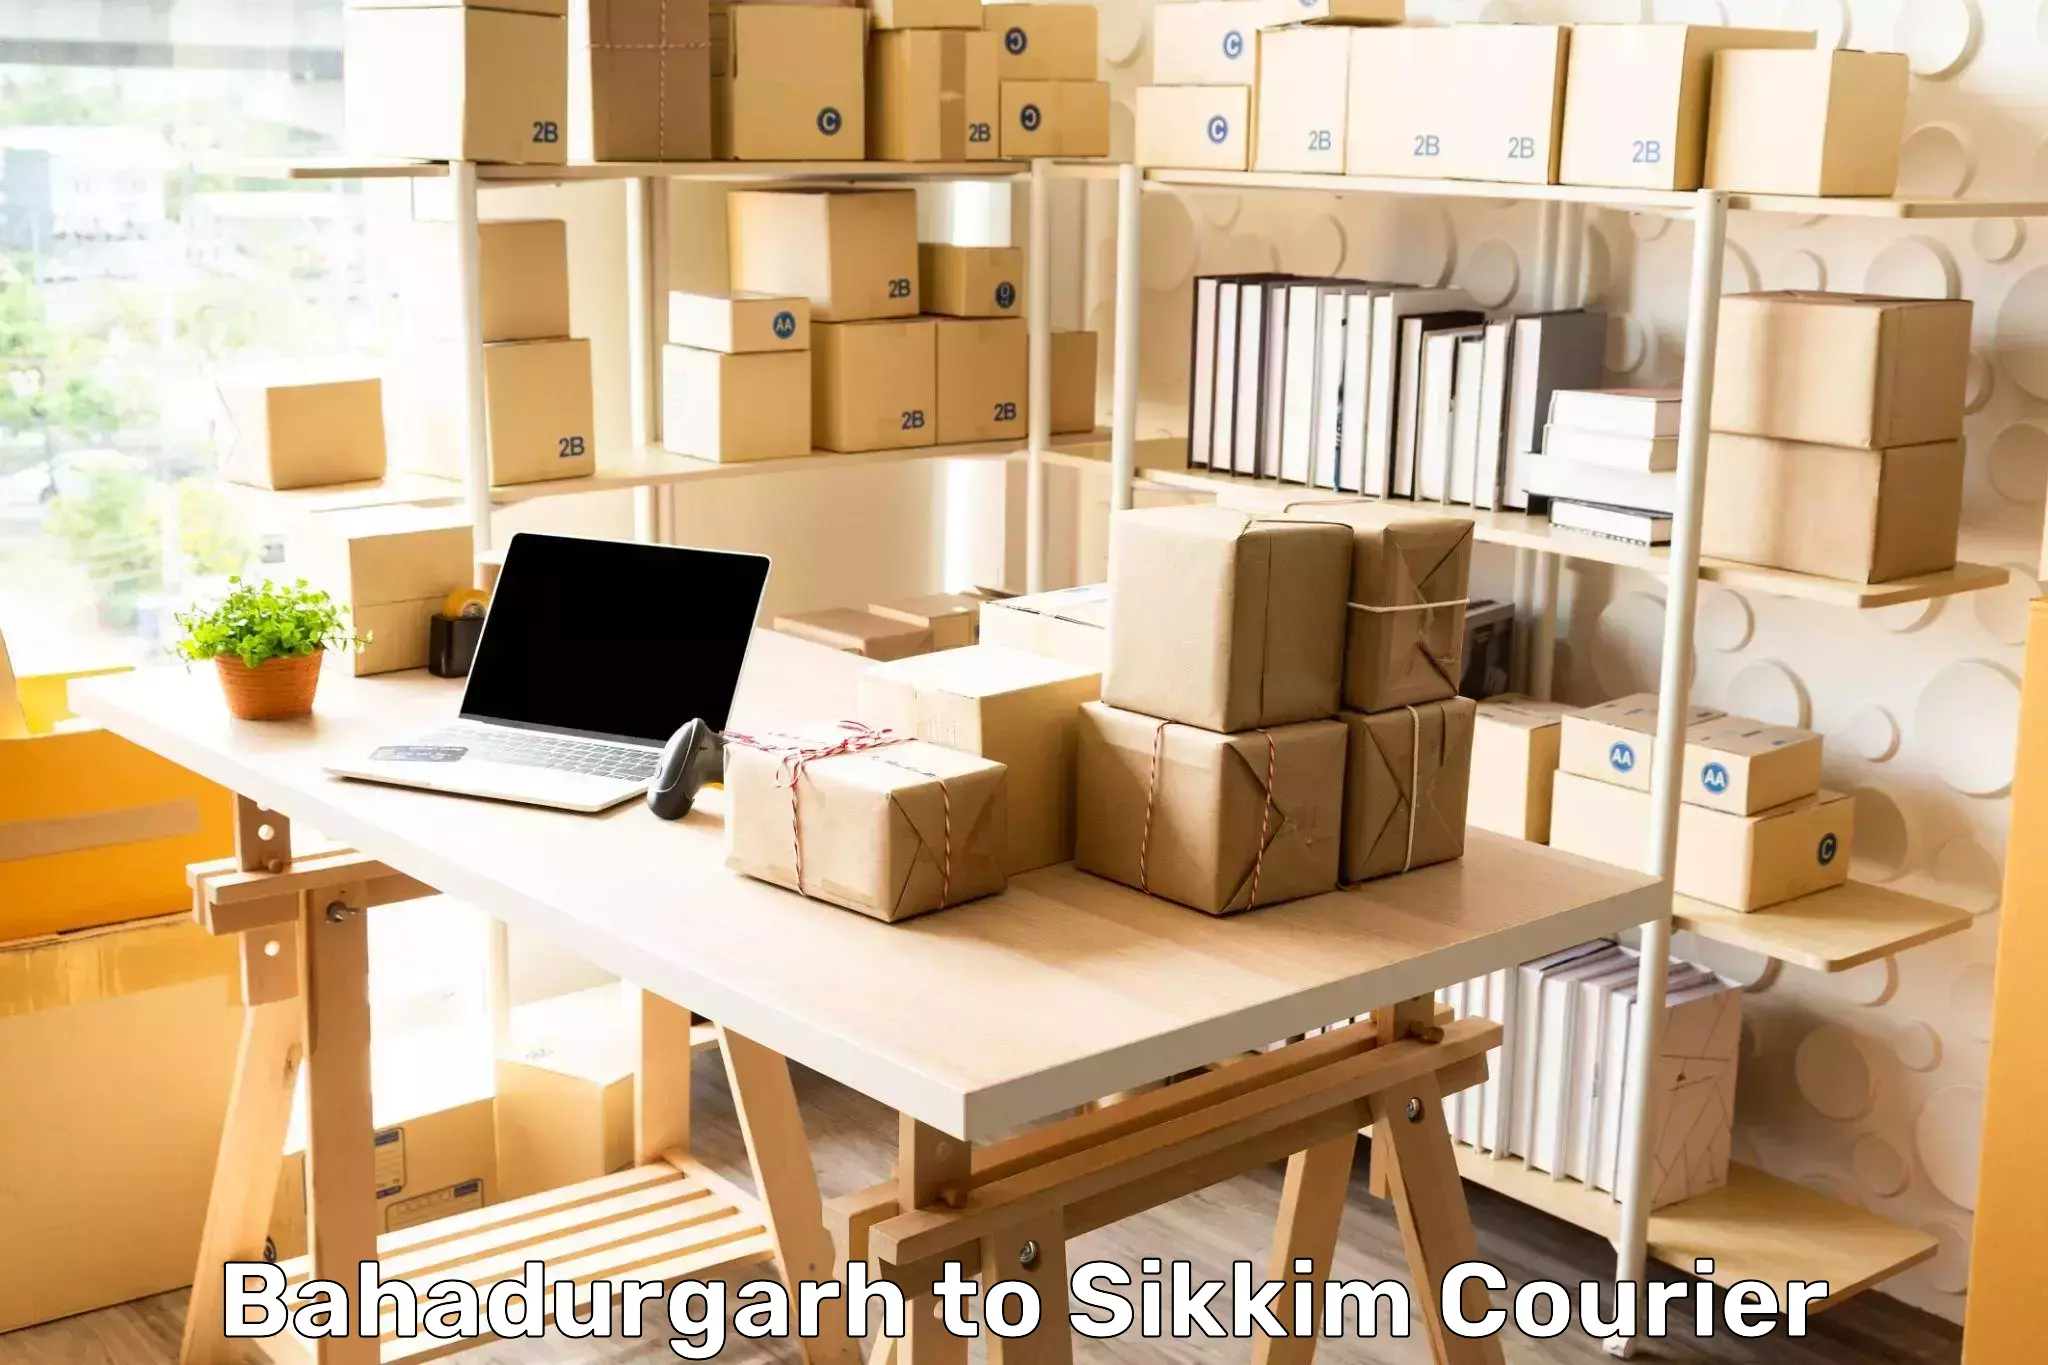 Multi-national courier services Bahadurgarh to Sikkim